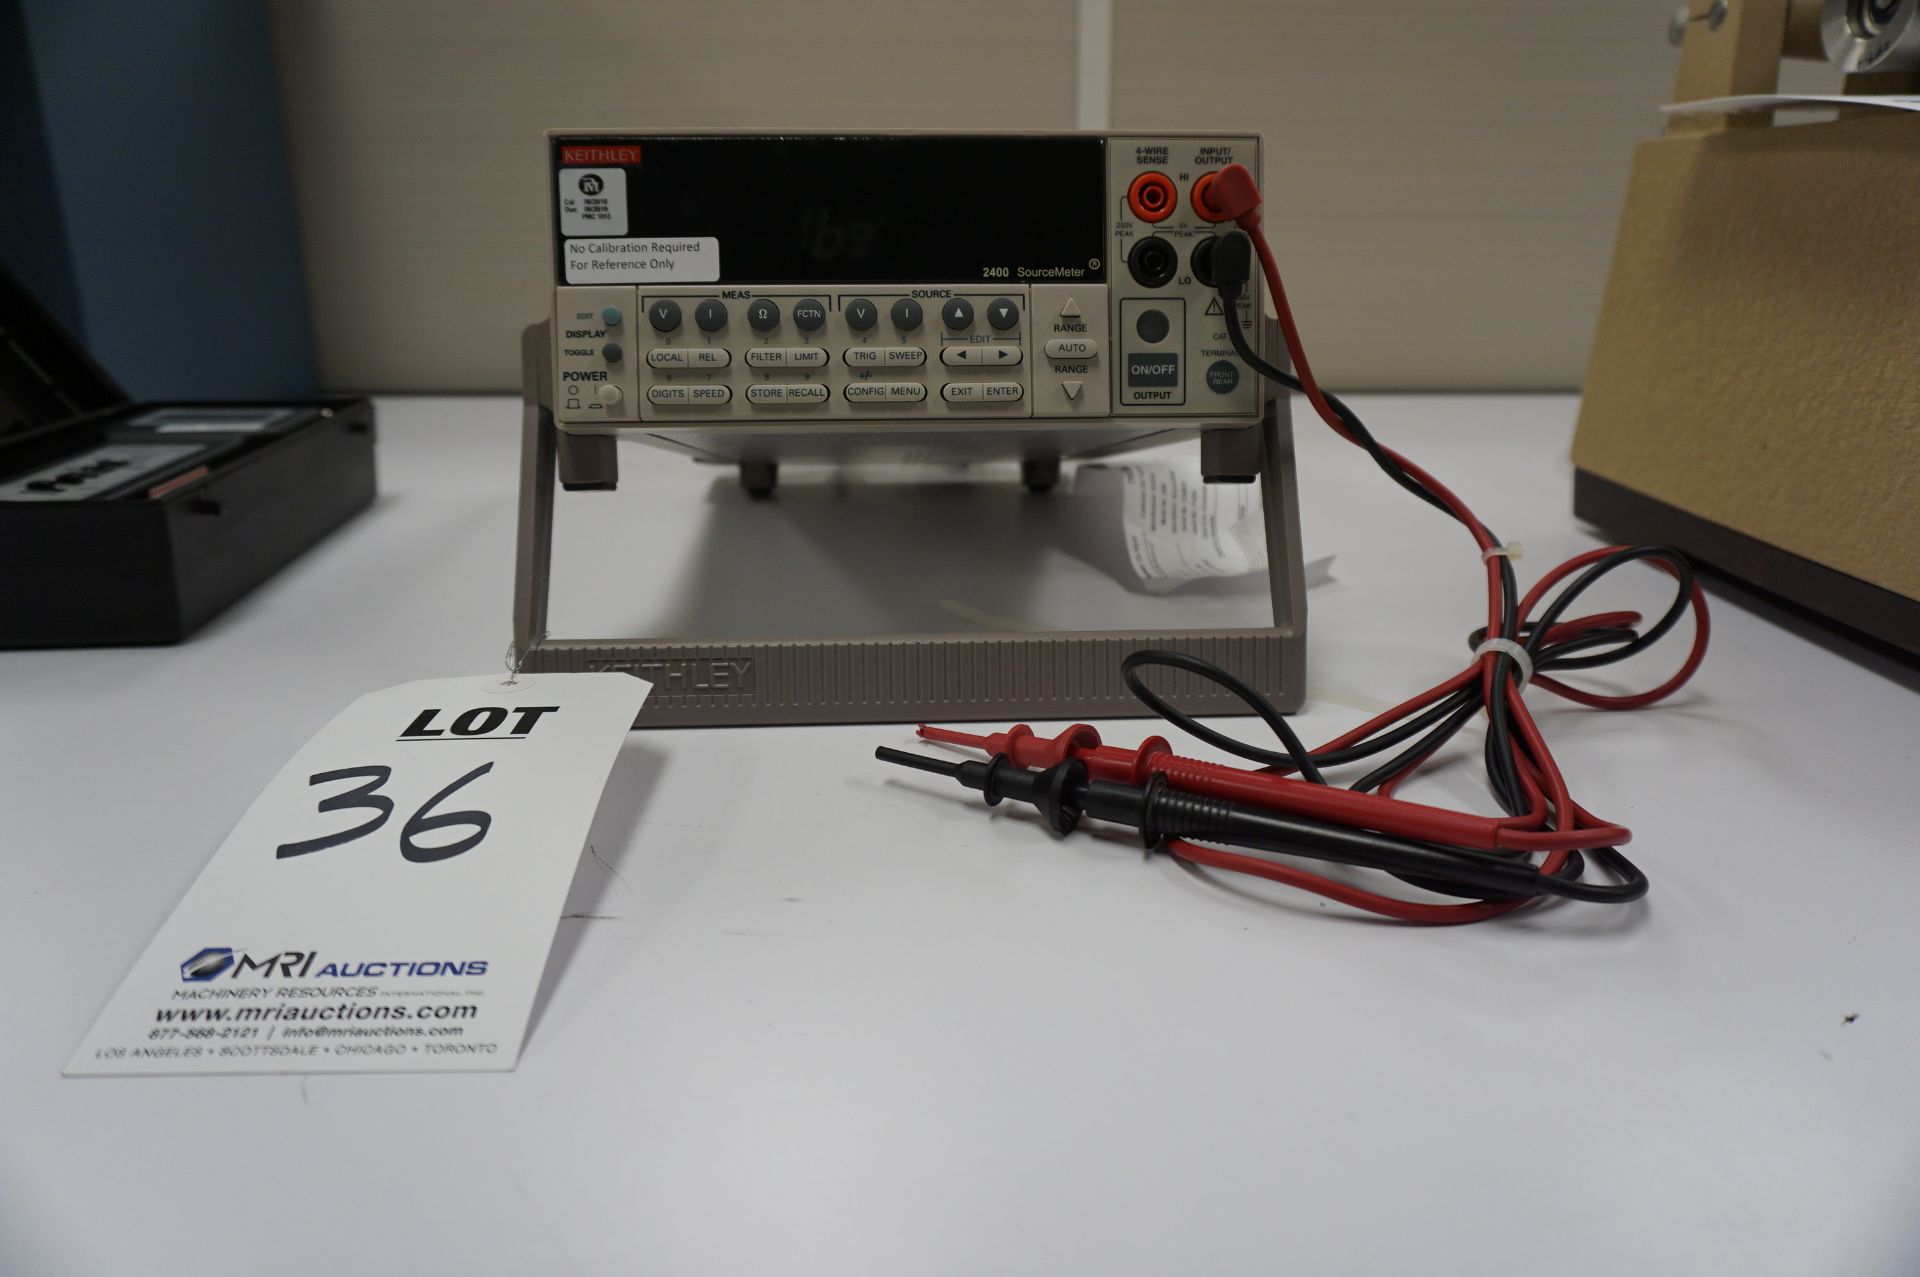 KEITHLY 2400 SOURCE METER, S/N 1238978, WITH POWER CABLE AND TESTERS